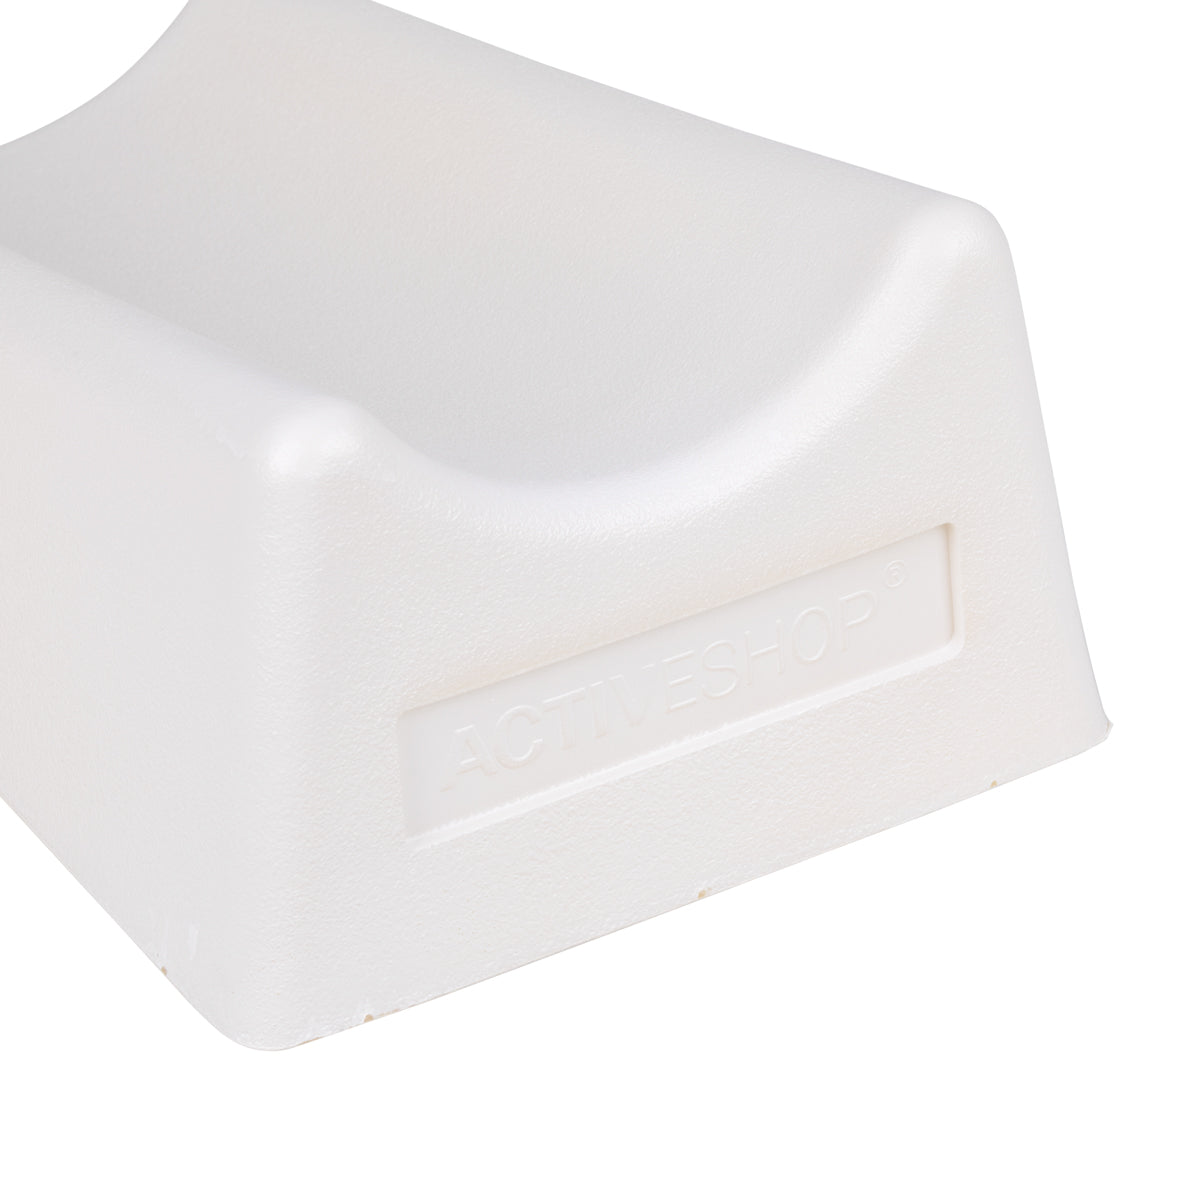 FOOTREST FOR PEDICURE ACTIV WHITE II QUALITY